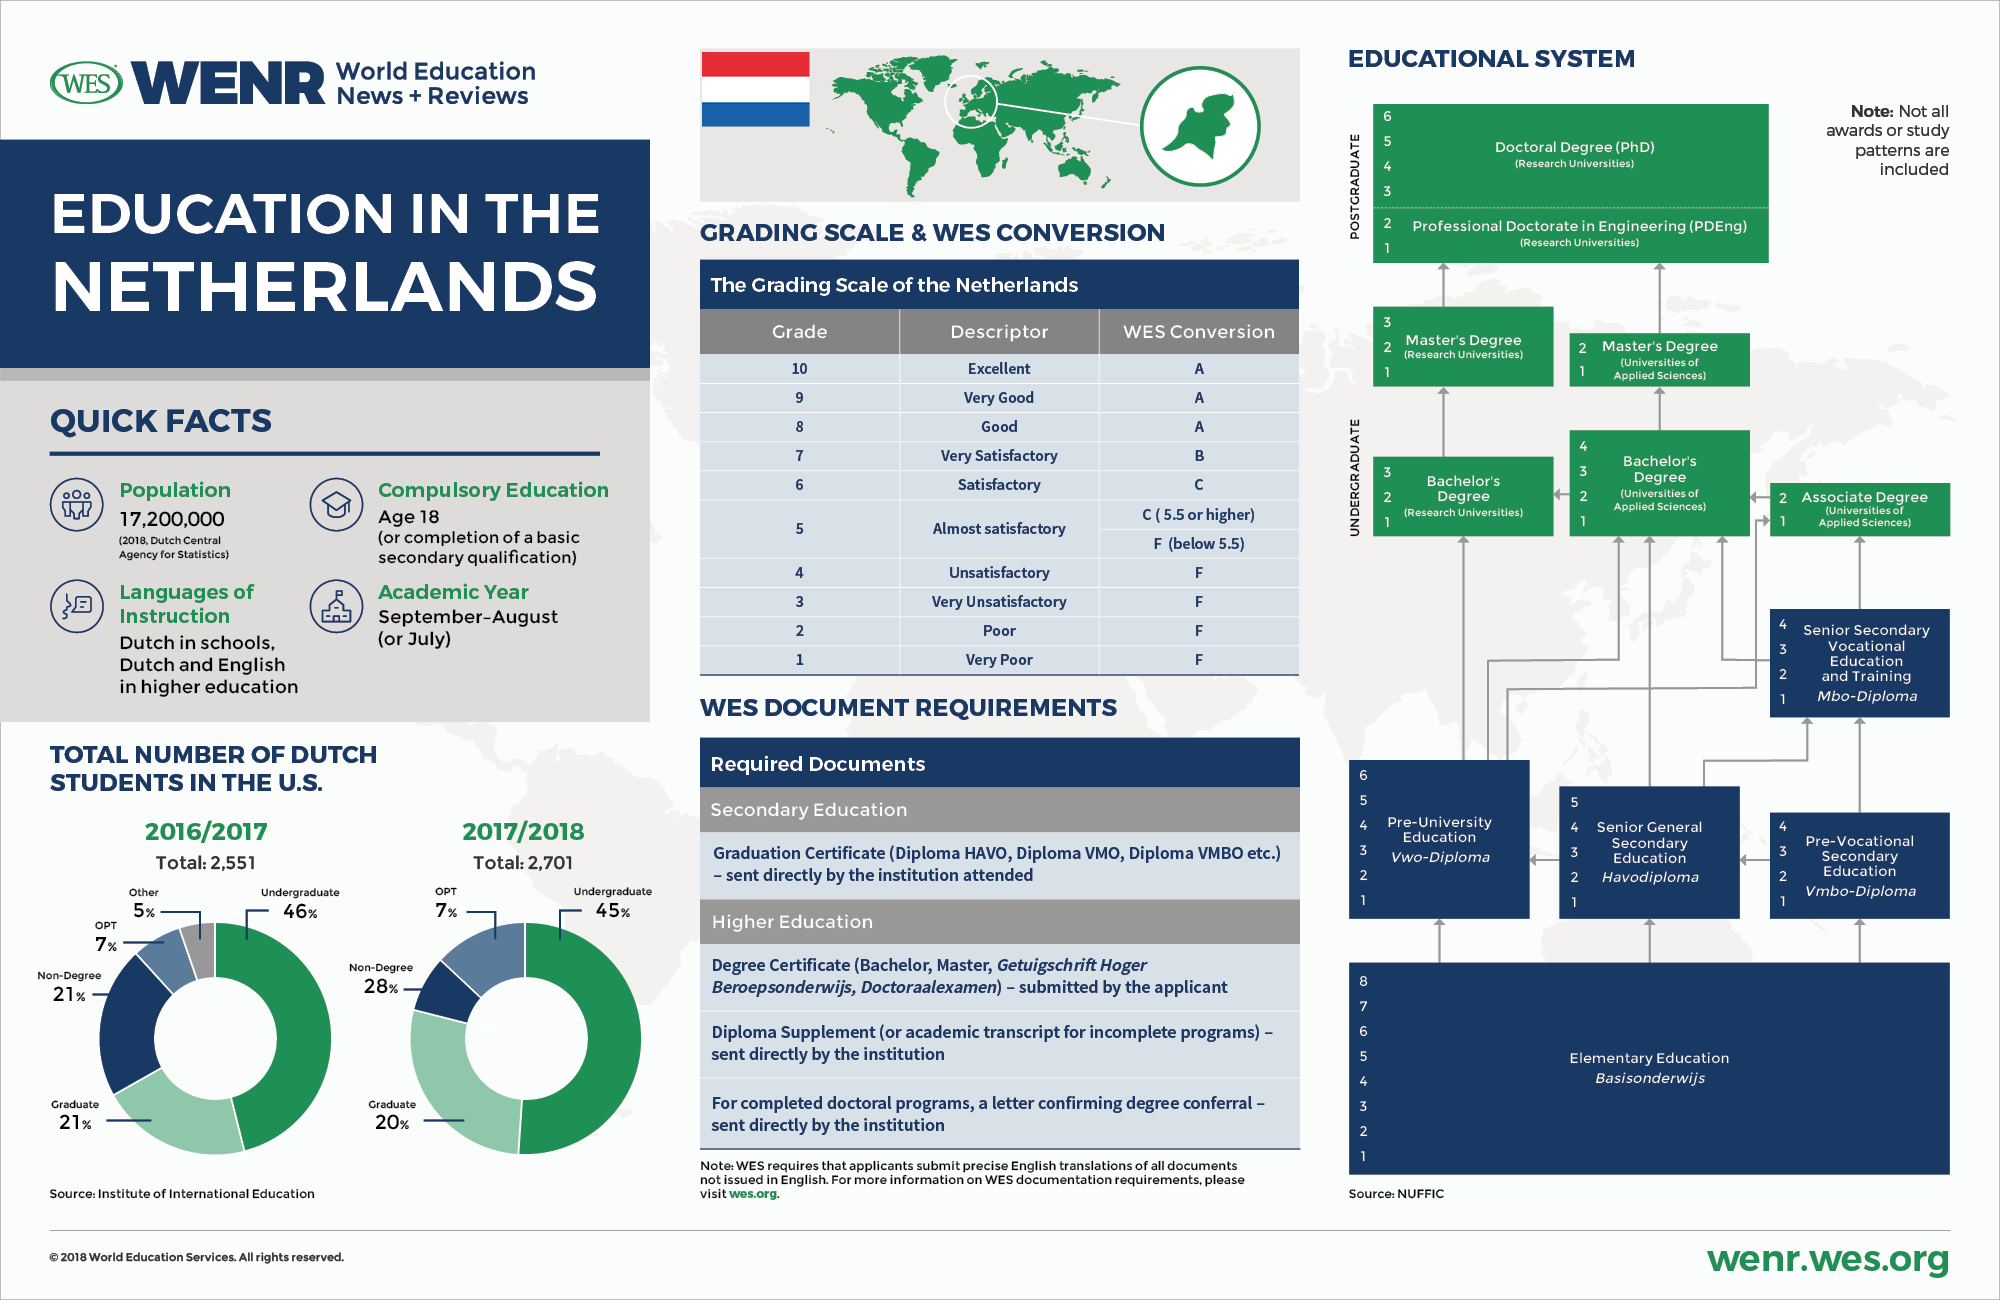 An infographic with fast facts on the educational system of the Netherlands